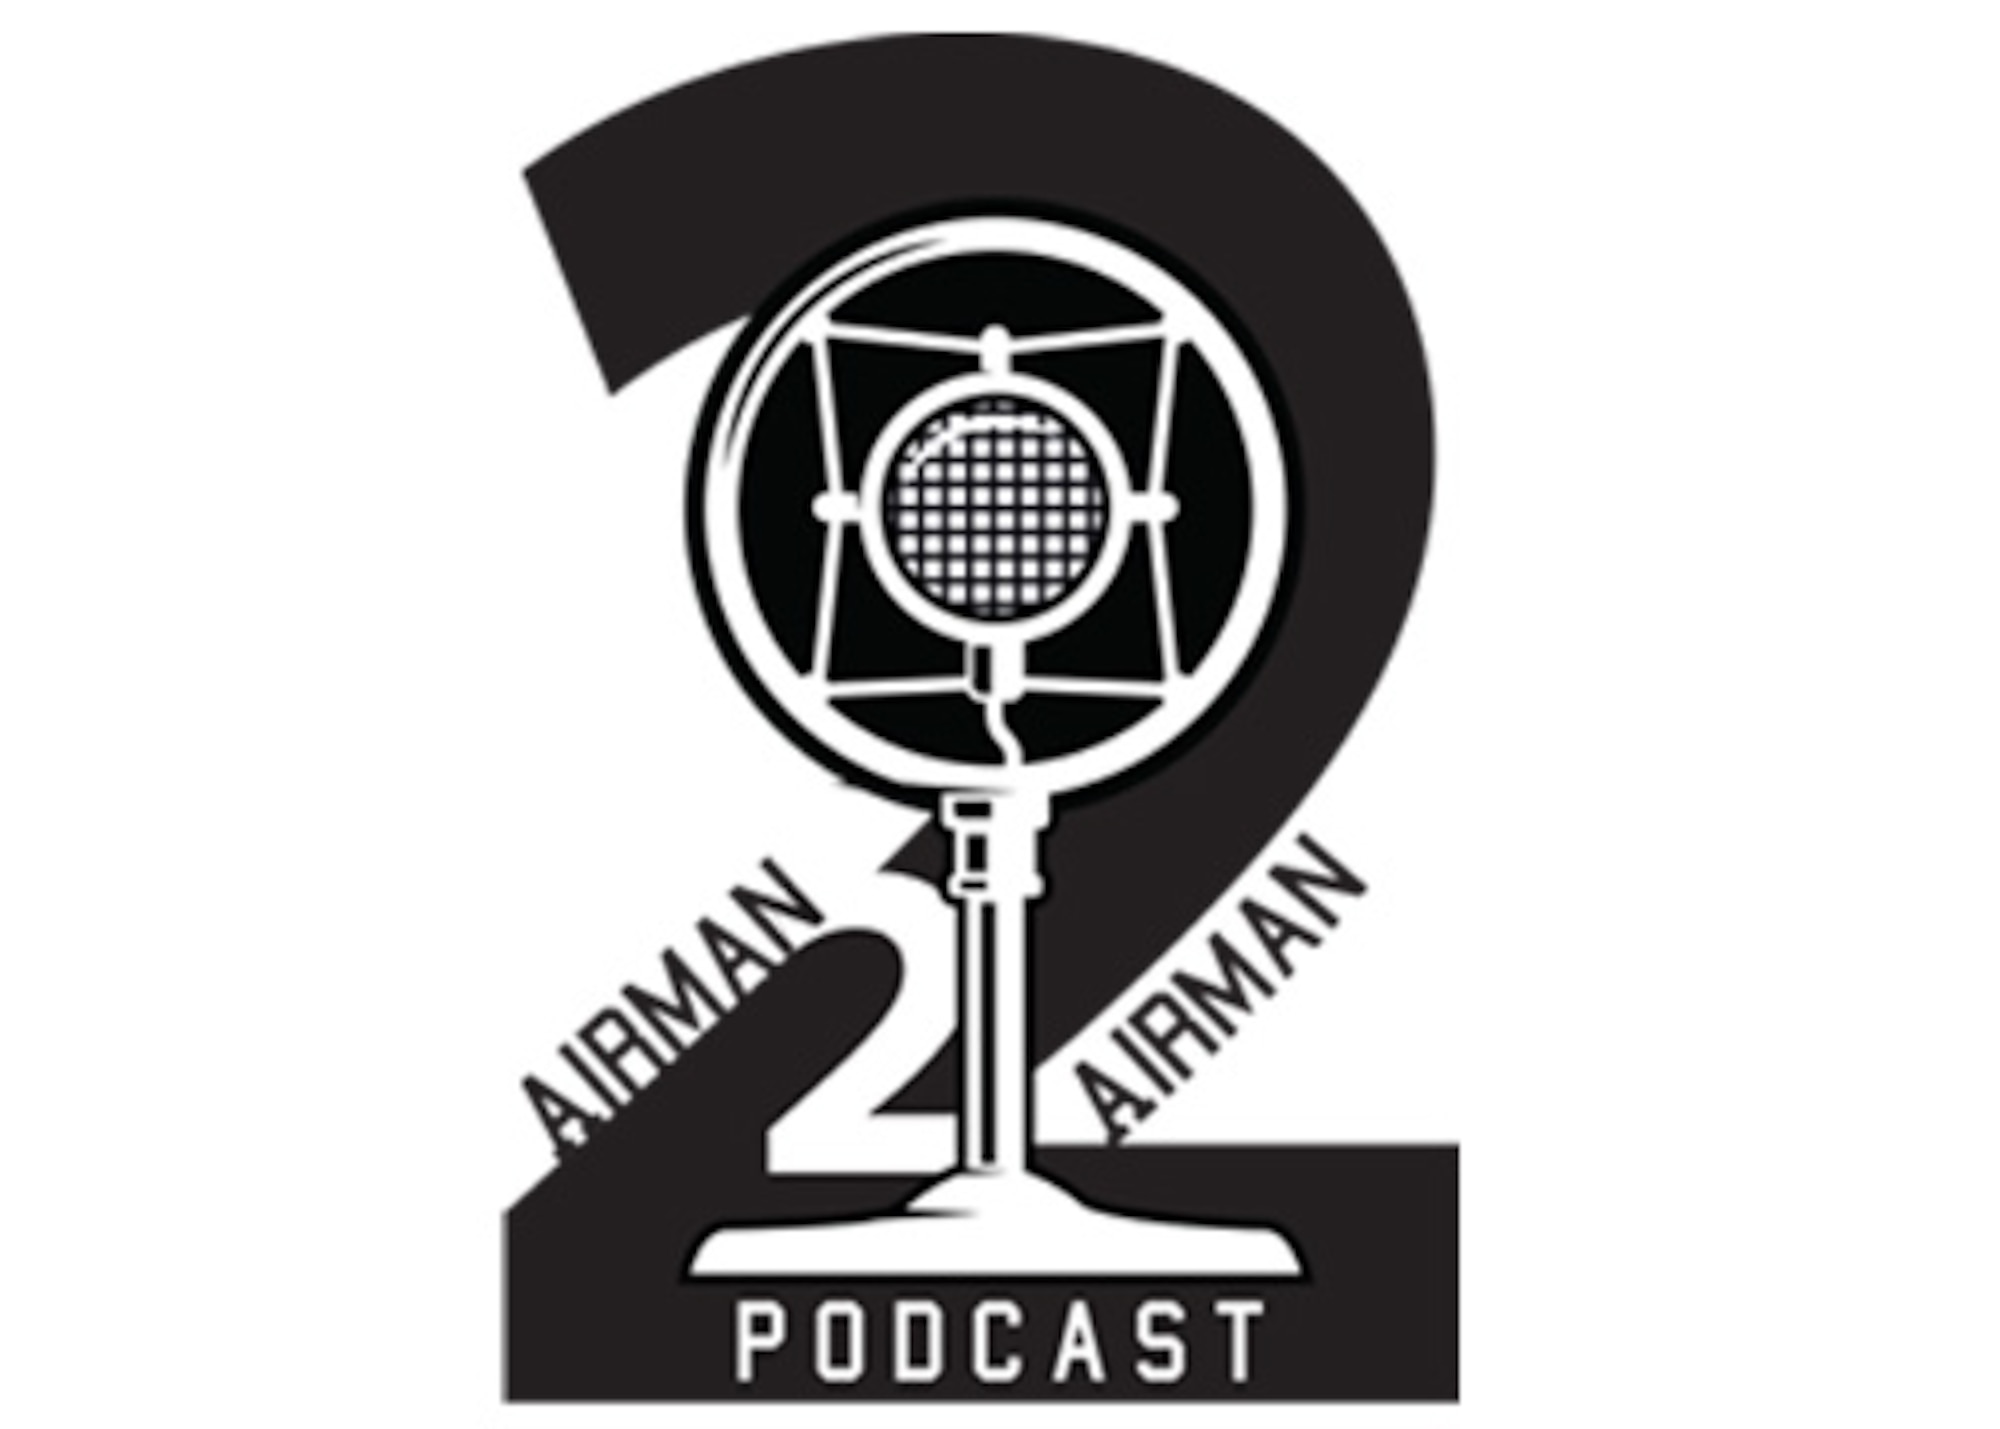 Airman to Airman podcast plans to release a 20 minute episode every two weeks. Podcast themes will include volunteer opportunities, outdoor recreation, places to visit off base, education benefits and much more.